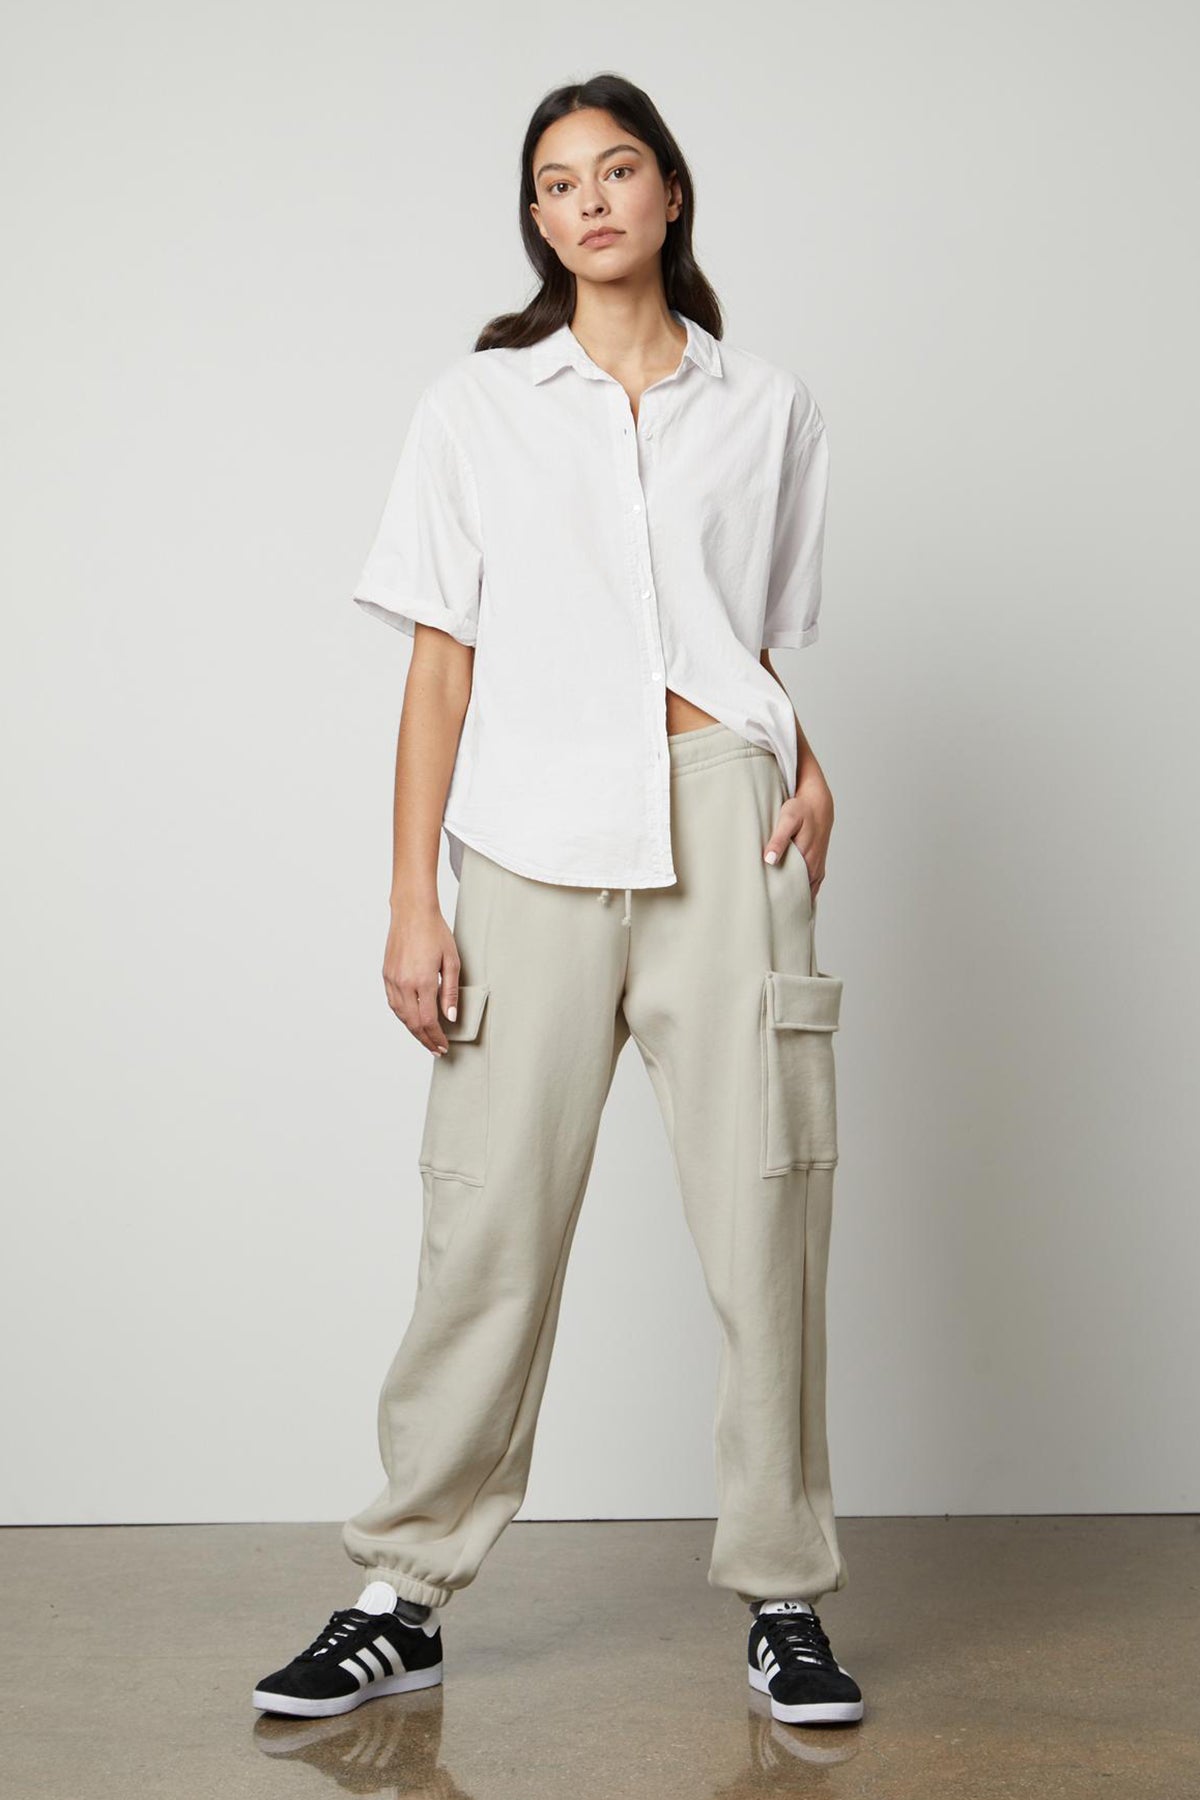   The model is wearing a white shirt and LUMI DRAWSTRING WAIST SWEATPANT cargo pants from Velvet by Graham & Spencer, perfect for everyday wear or running errands. 